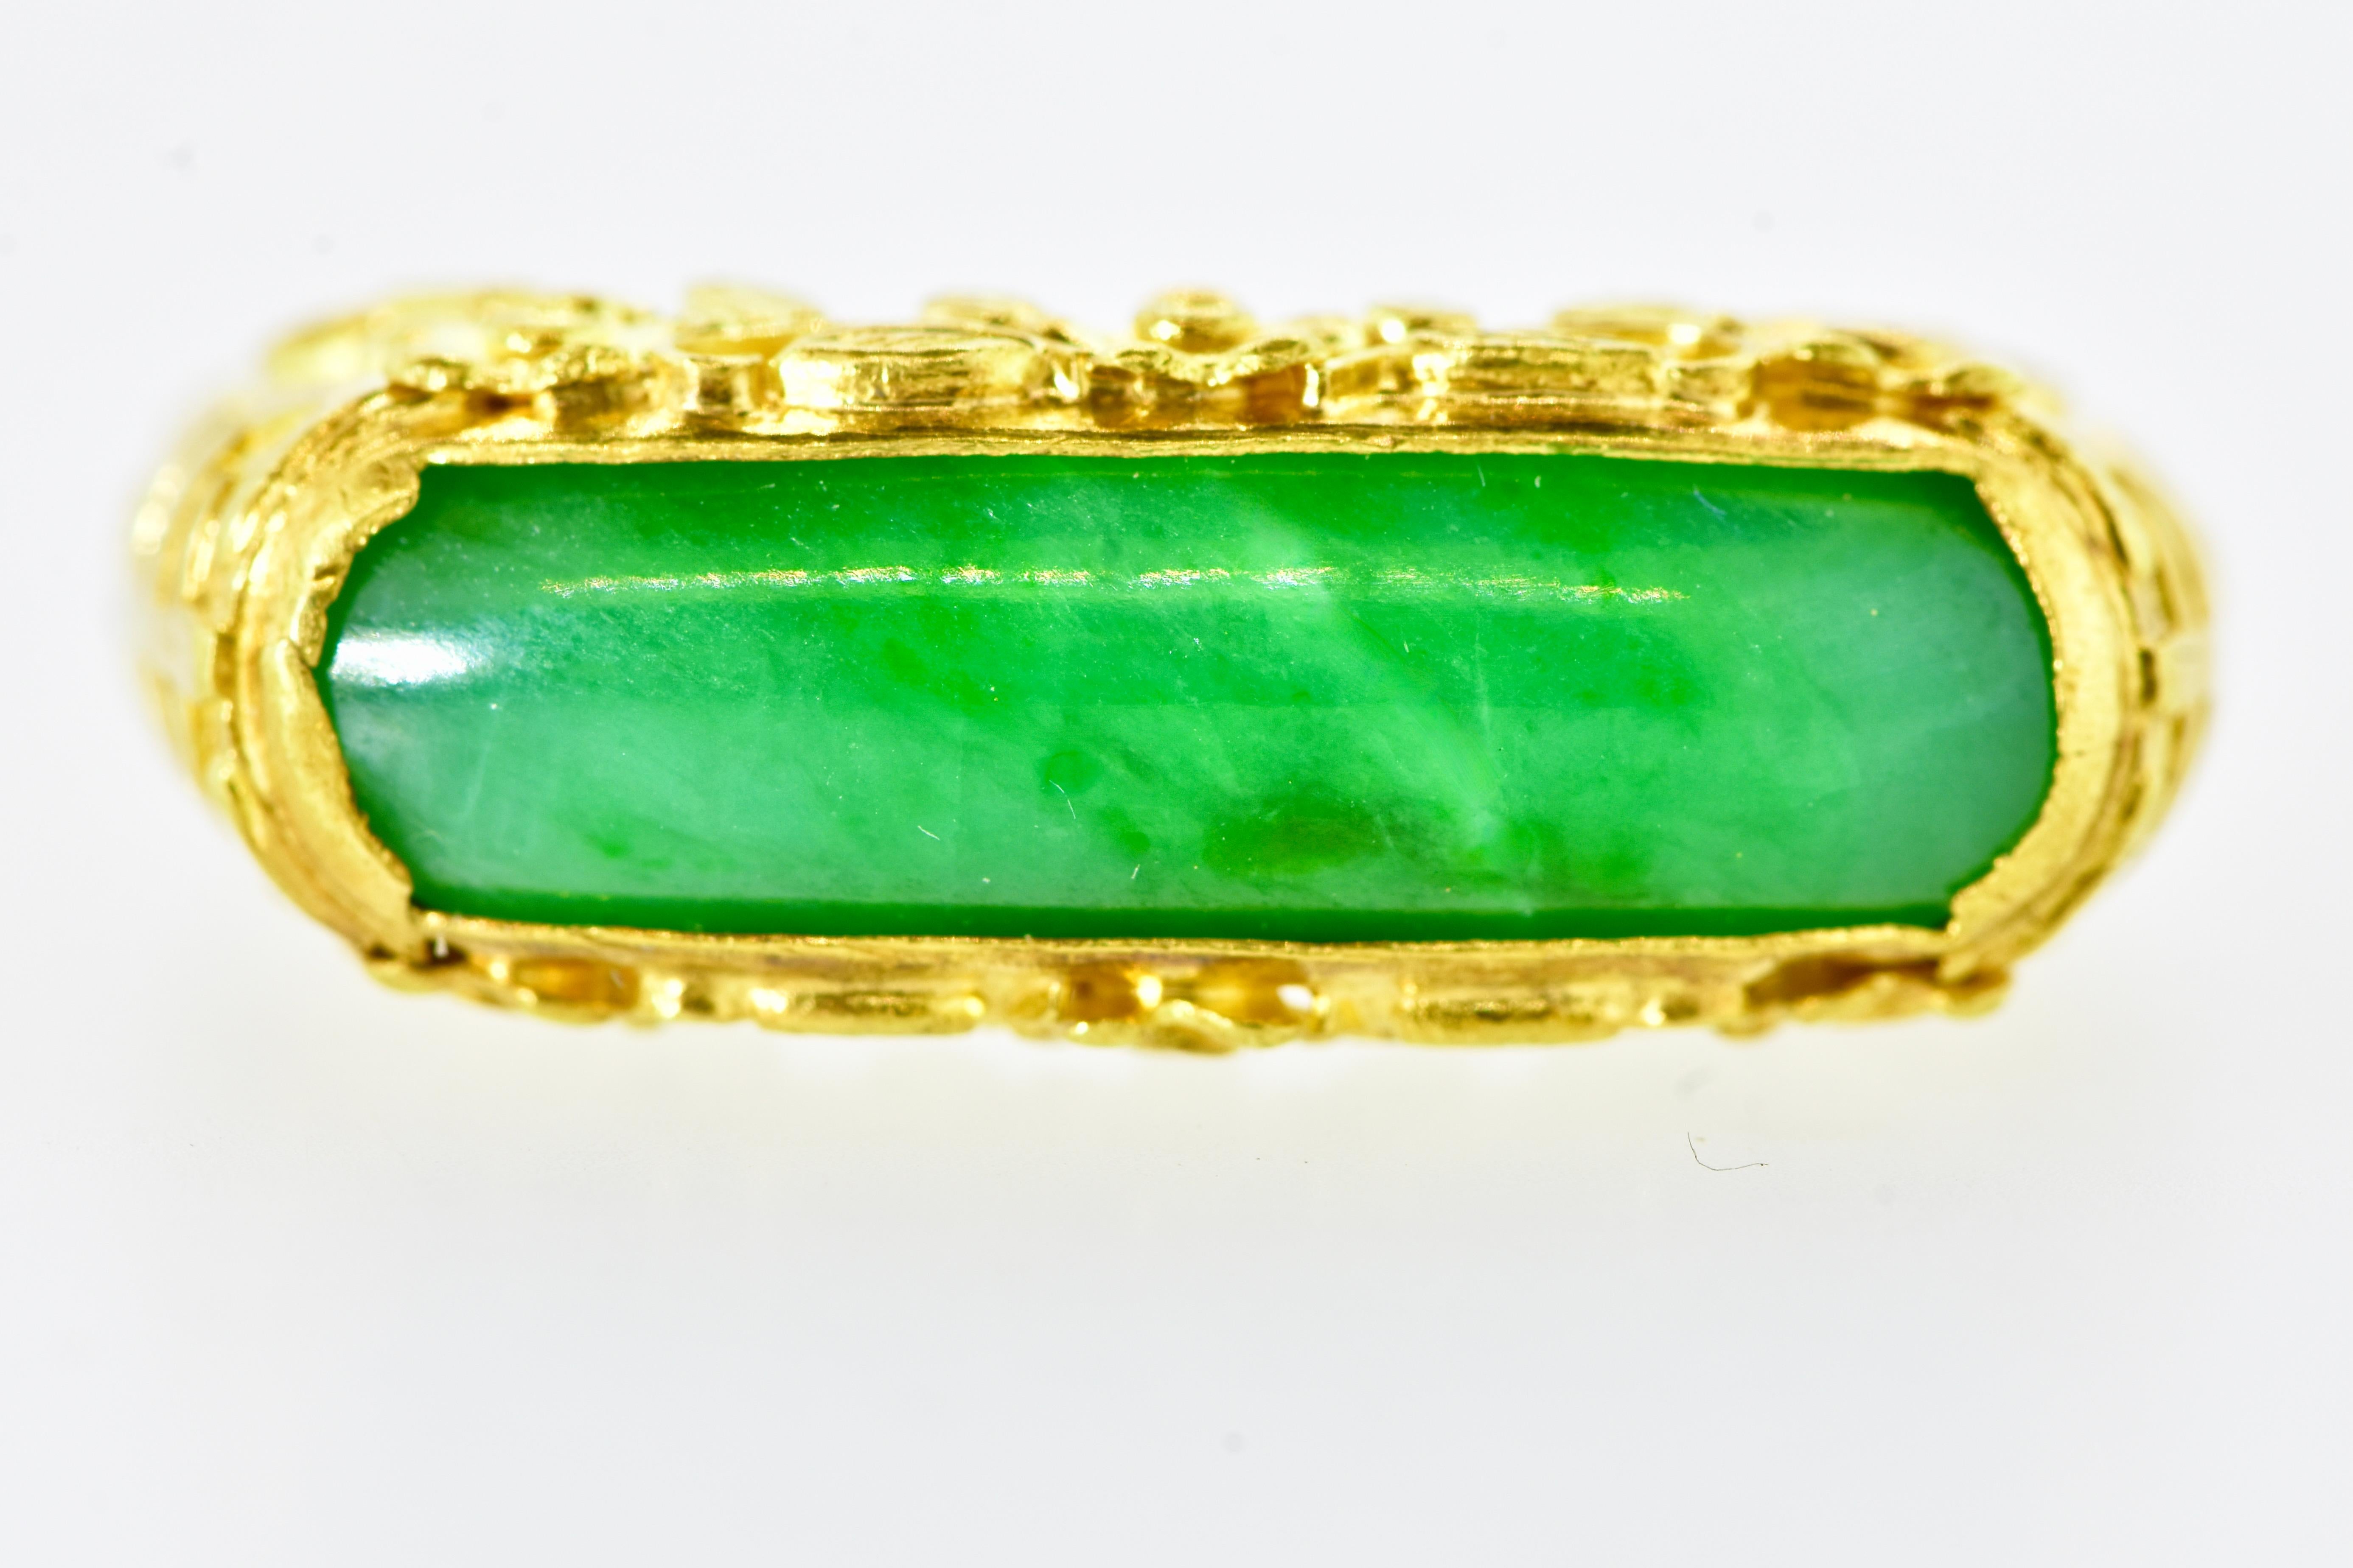 Vintage antique ring centering bright green jadeite jade and decorated, north and south, with a charming floral motif.  This early 20th century ring centers a slightly curved piece of green jadeite jade weighing approximately 3.0 cts. The high karat